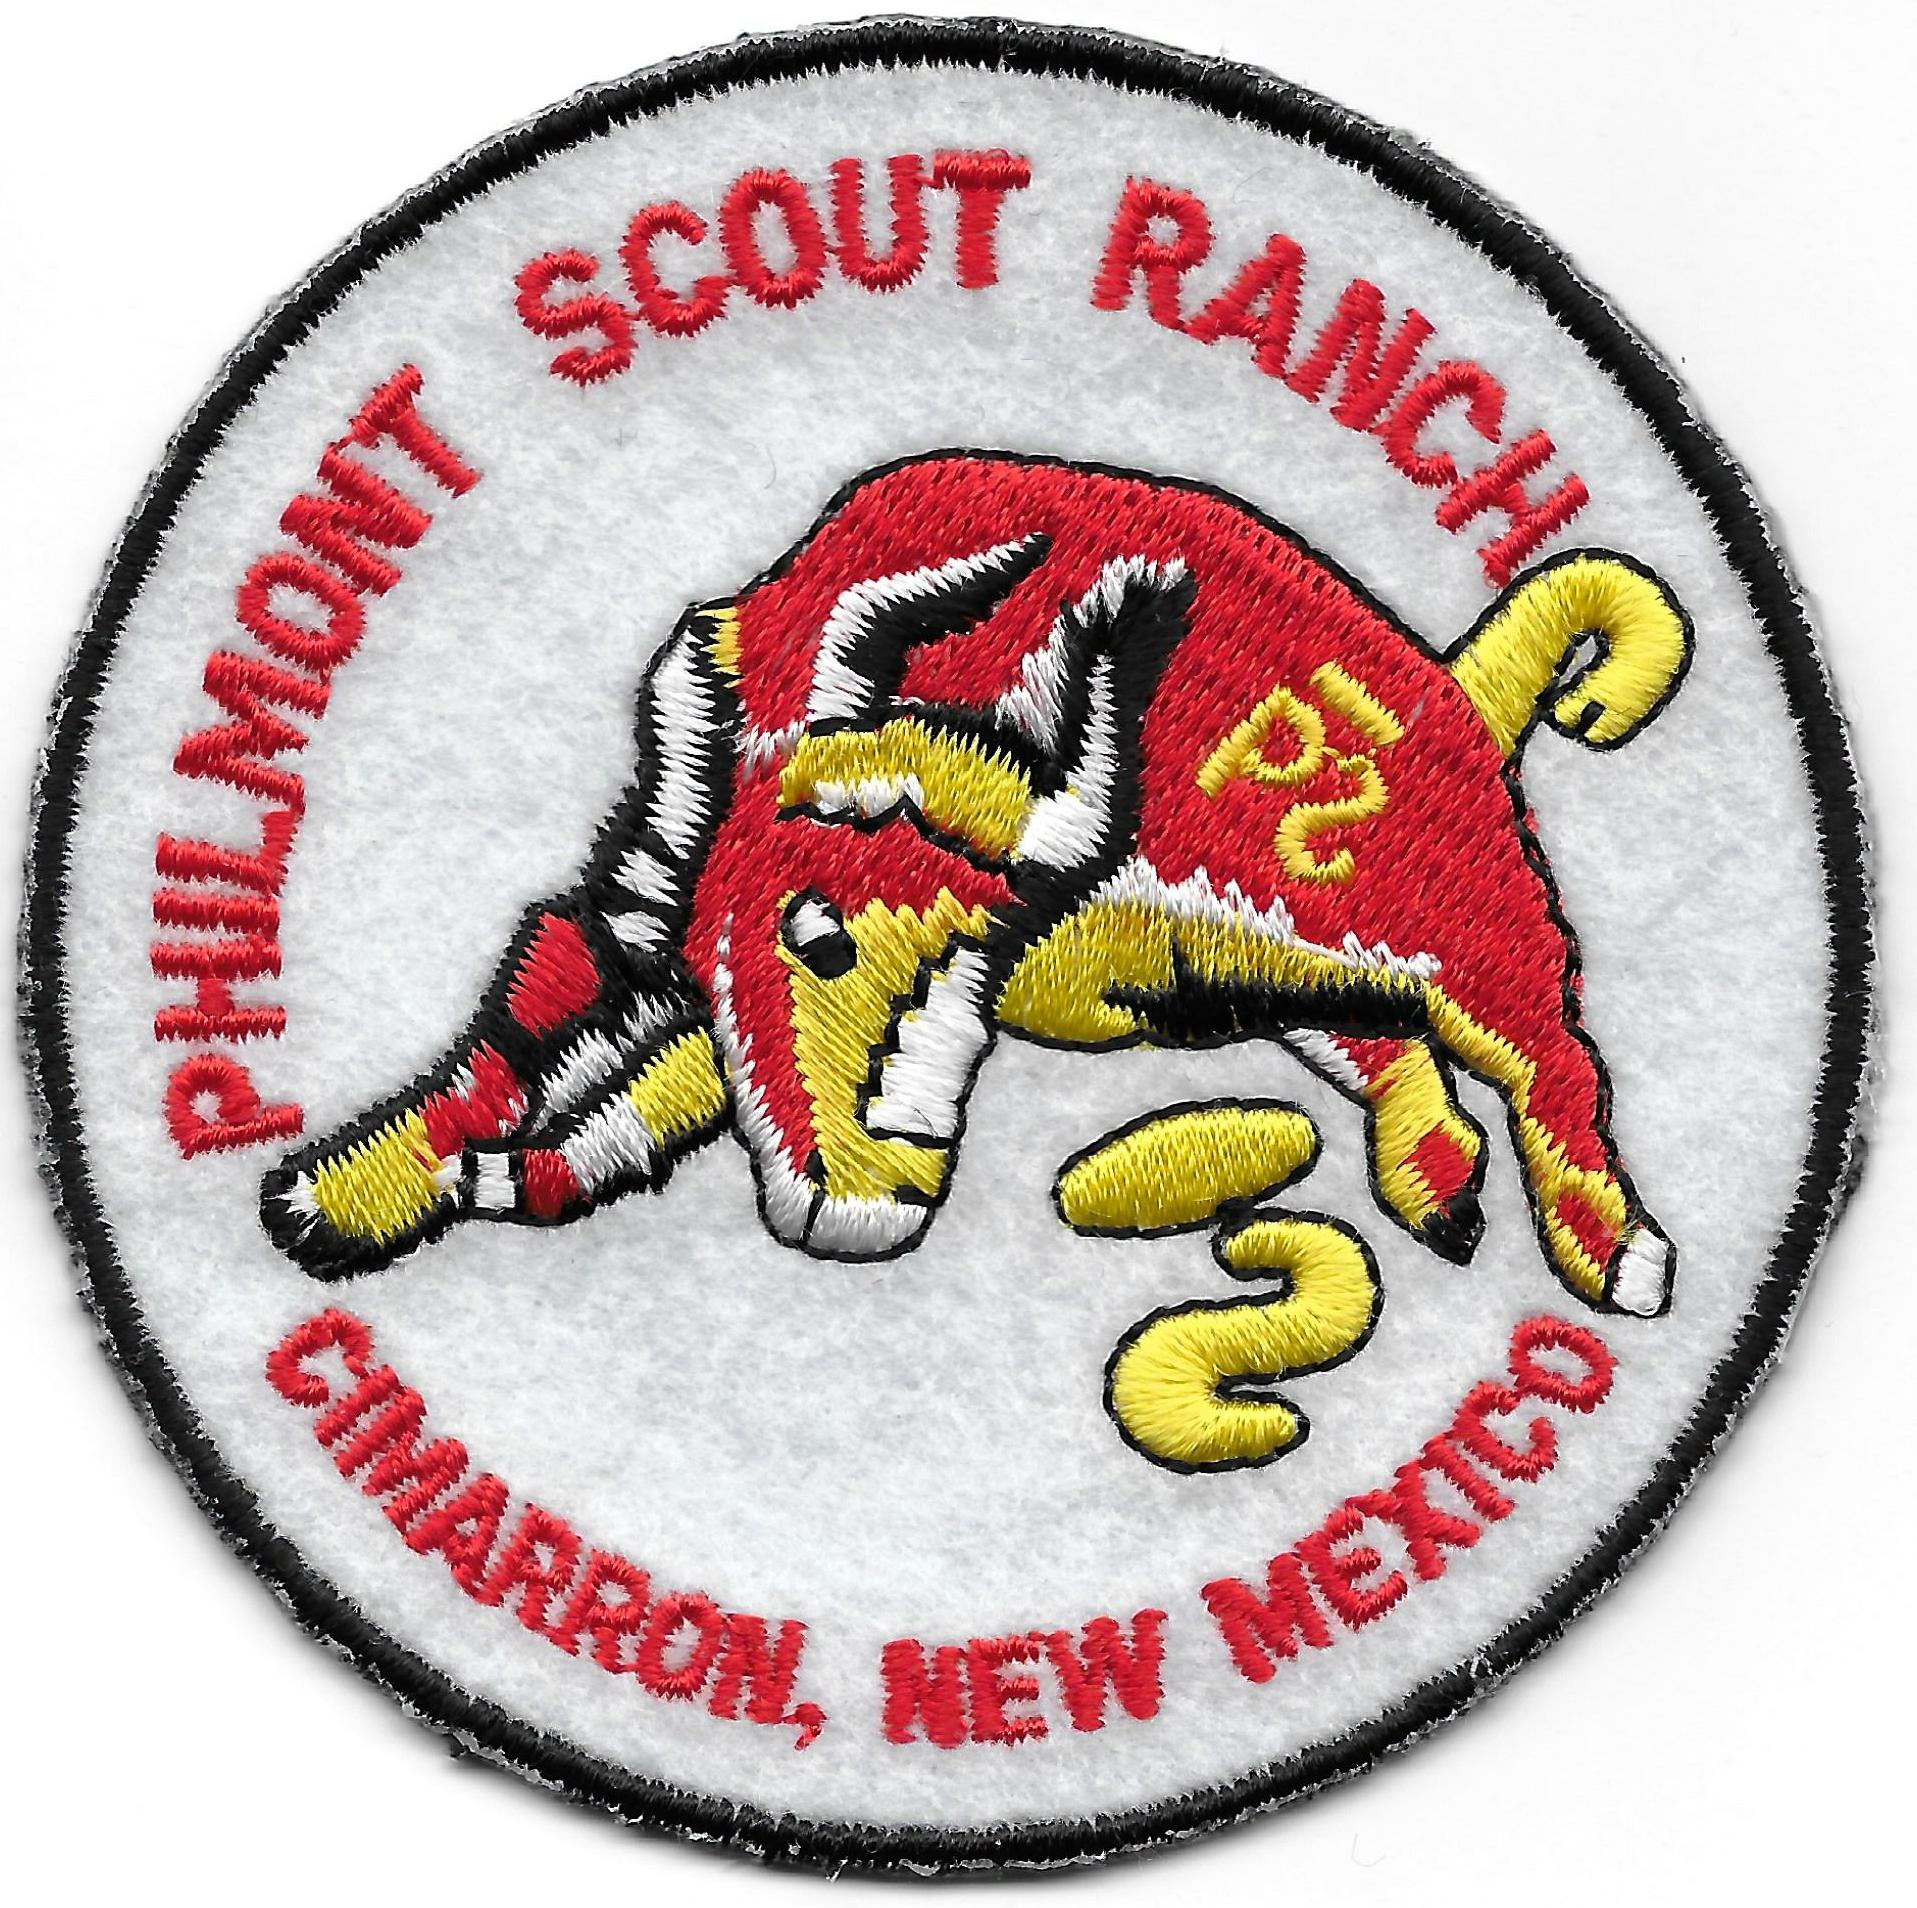 Philmont 2017 - Circular with red bull patch image